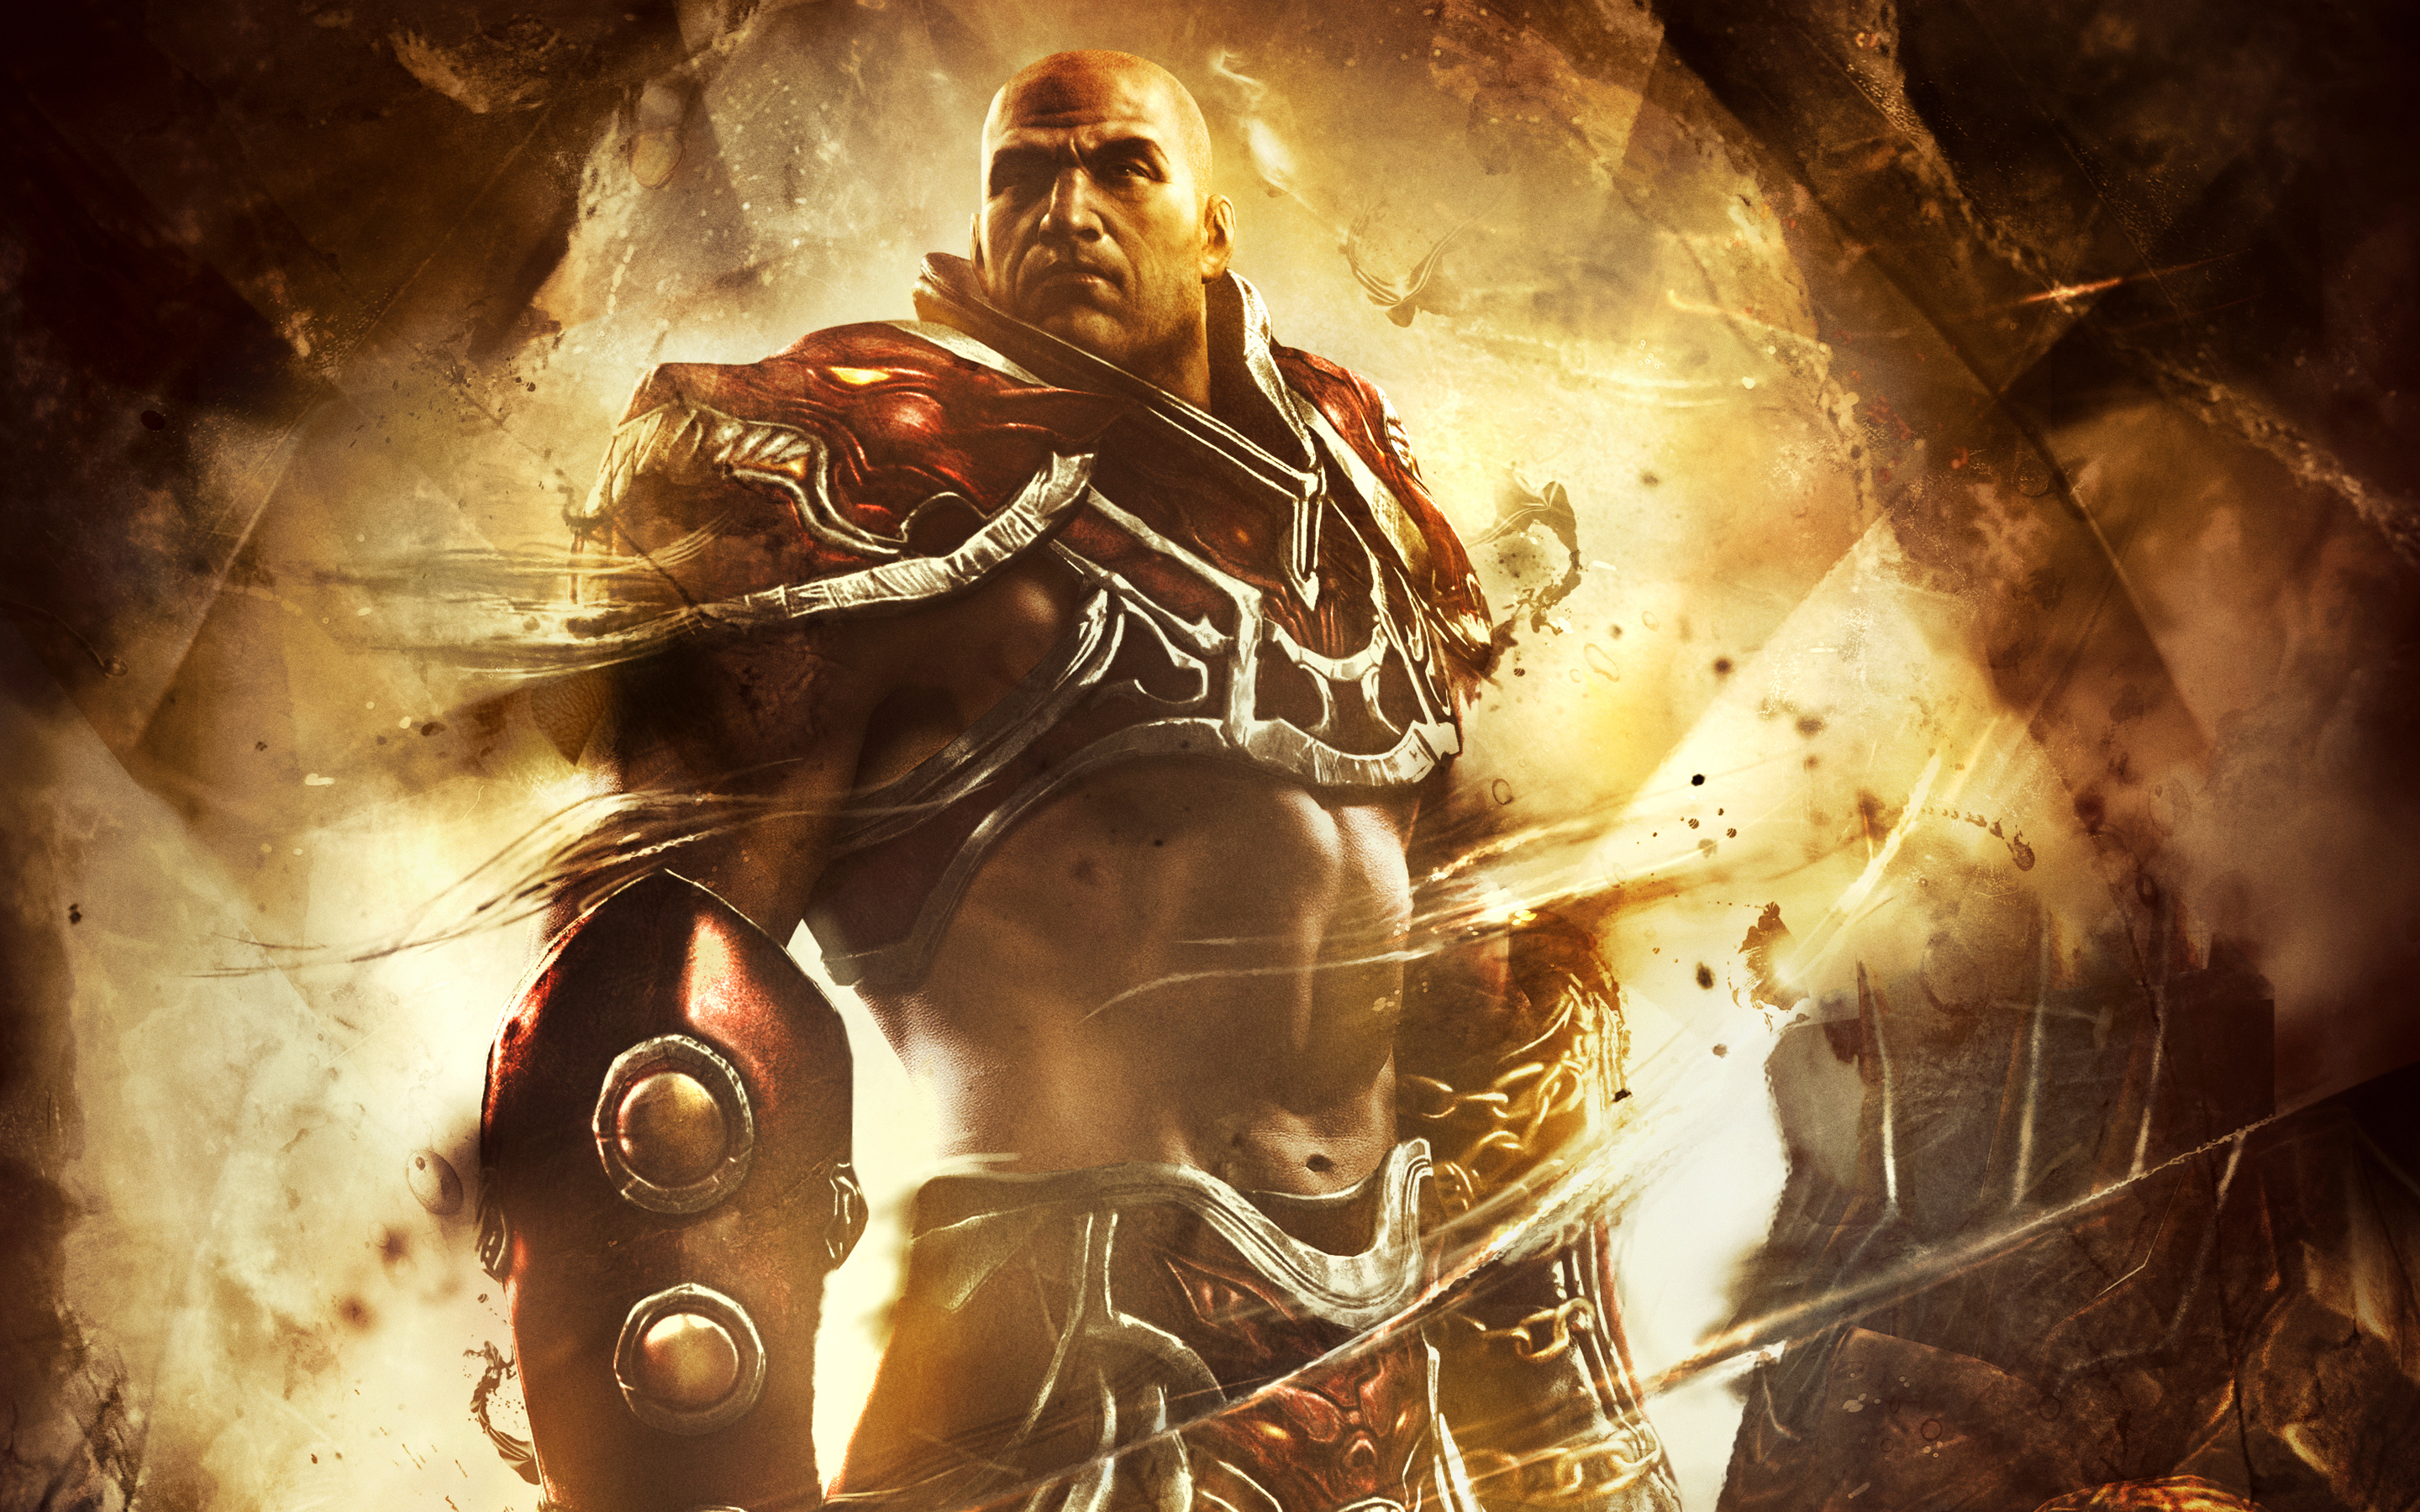 Spartan Warrior God of War Ascension Wallpapers HD Wallpapers 2880x1800